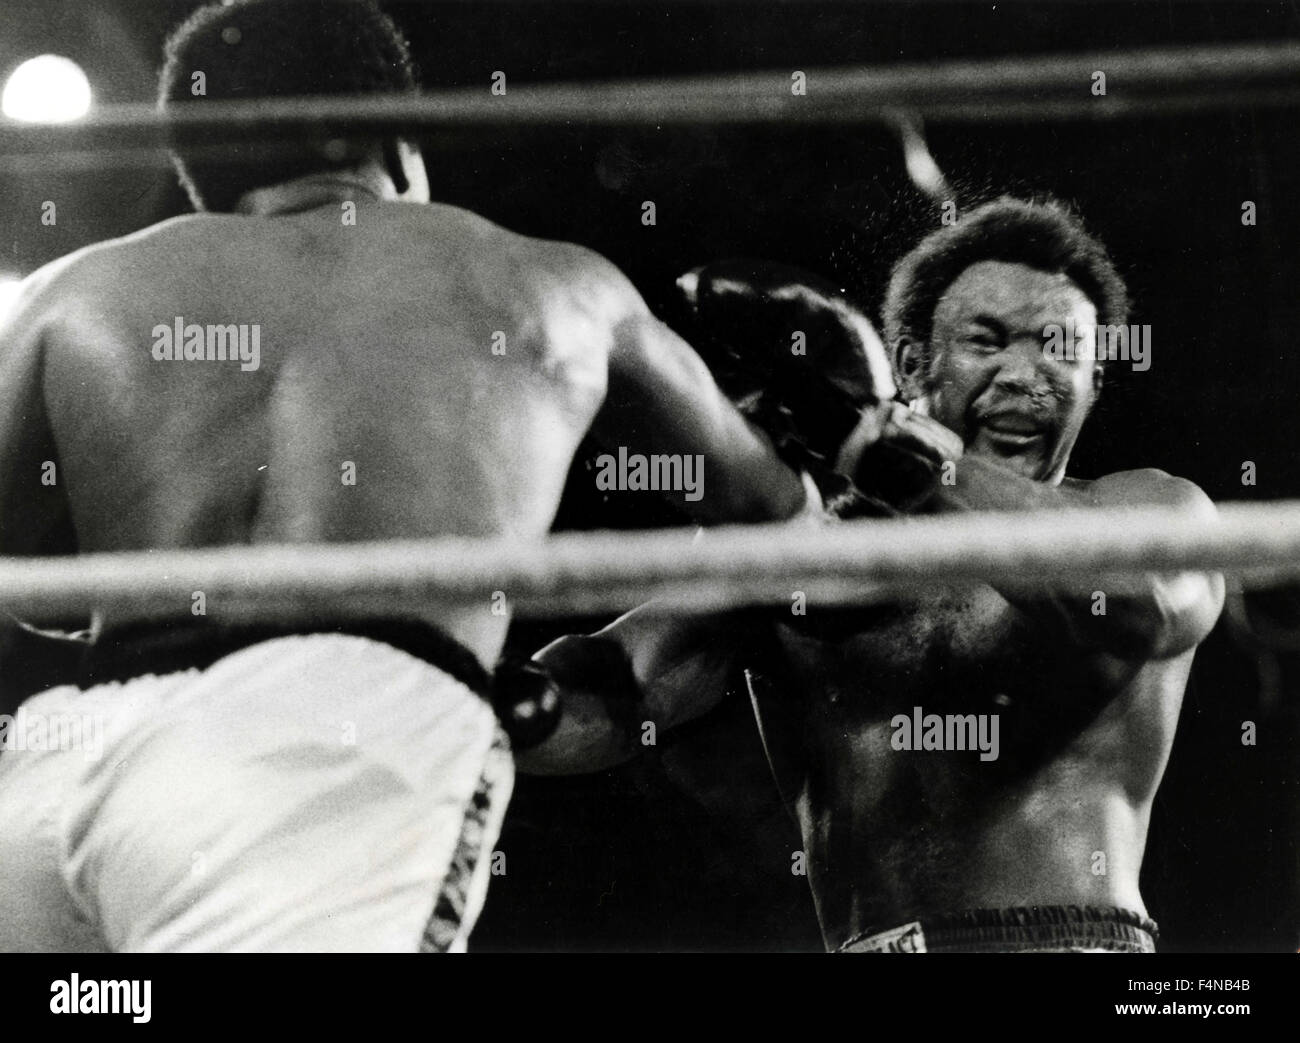 Boxing match between George Foreman and Muhammad Ali 3 Stock Photo